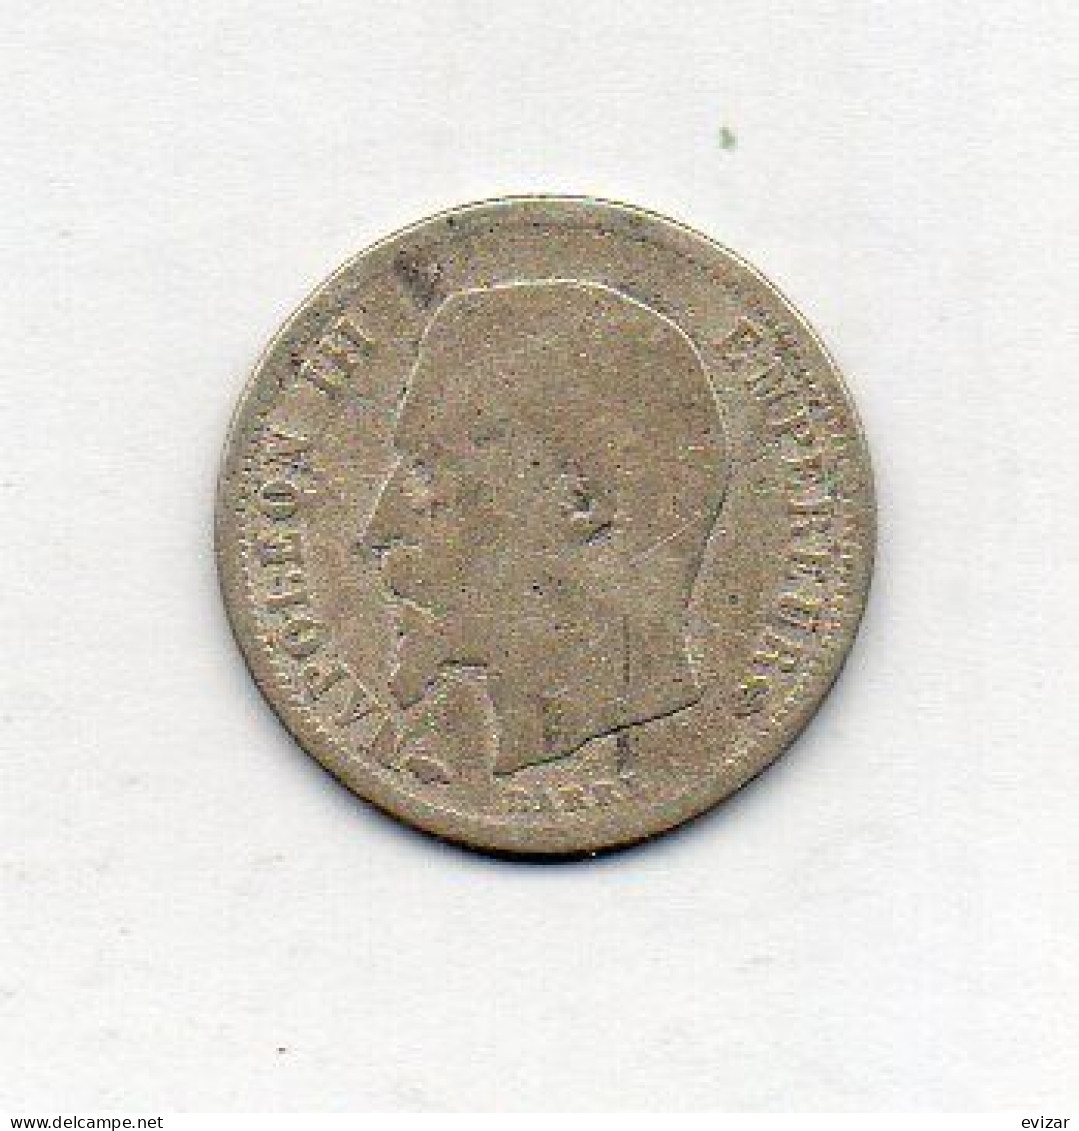 FRANCE, 50 Centimes, Silver, Year 1858-A, KM # 794.1 - 50 Centimes